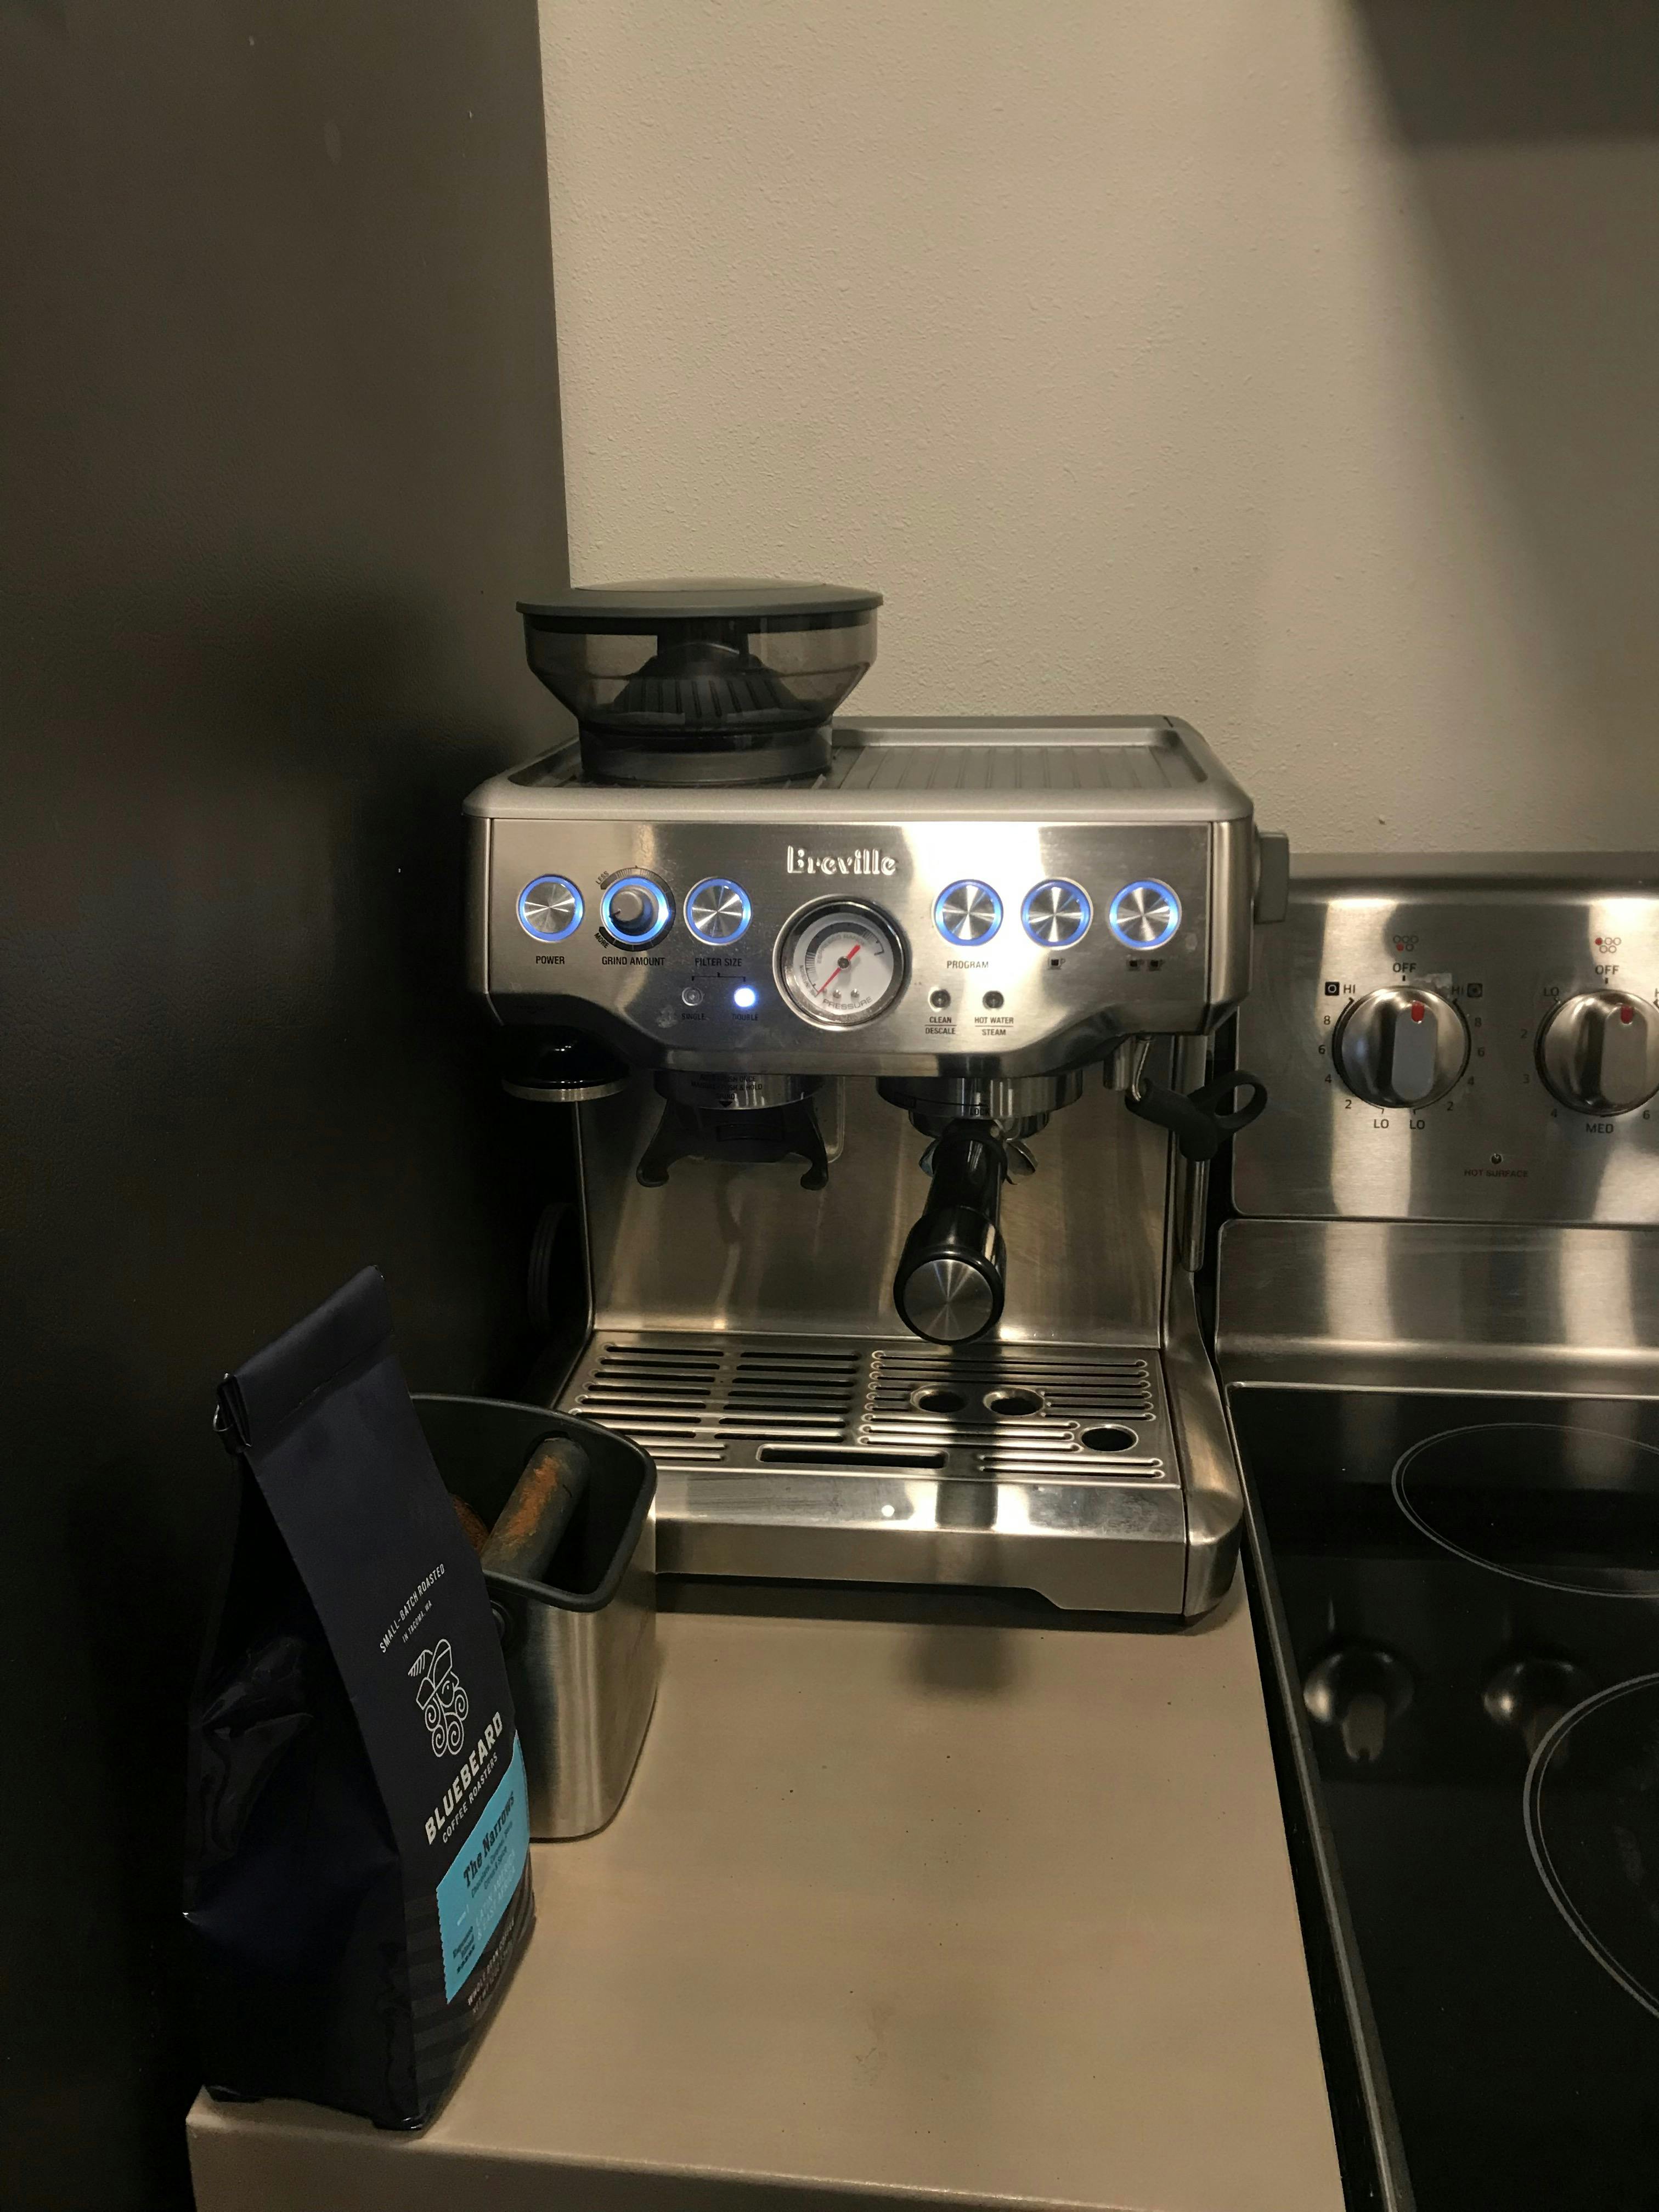 Breville The Barista Express Review